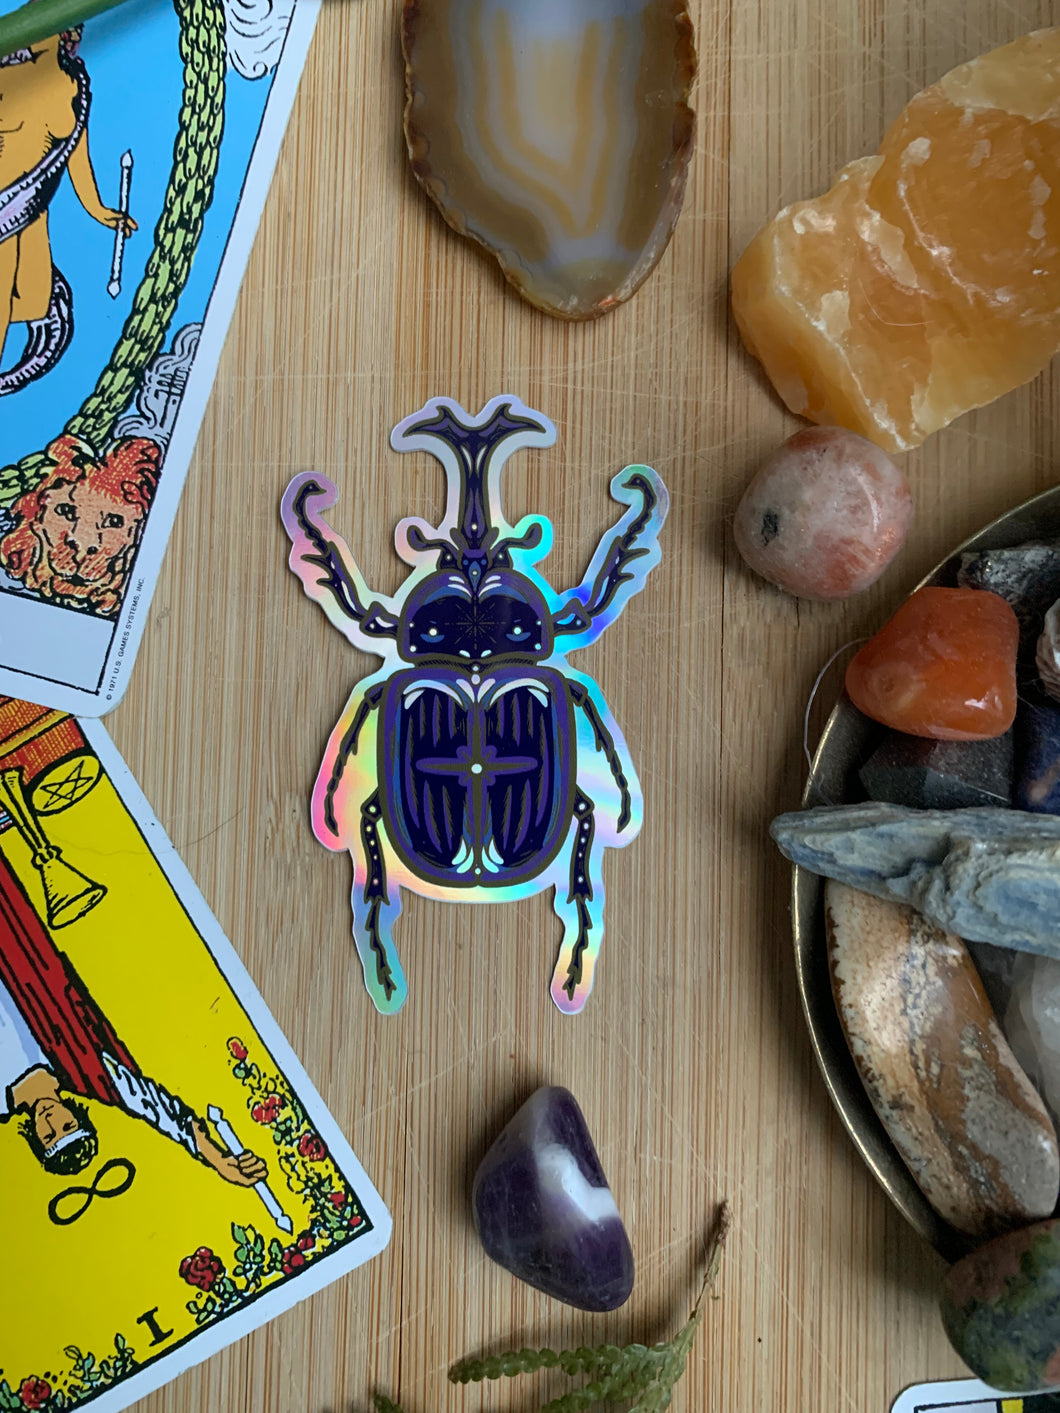 Stag Beetle Holographic Sticker | Bug Stickers, Insect Adhesives, Holographic Sticker